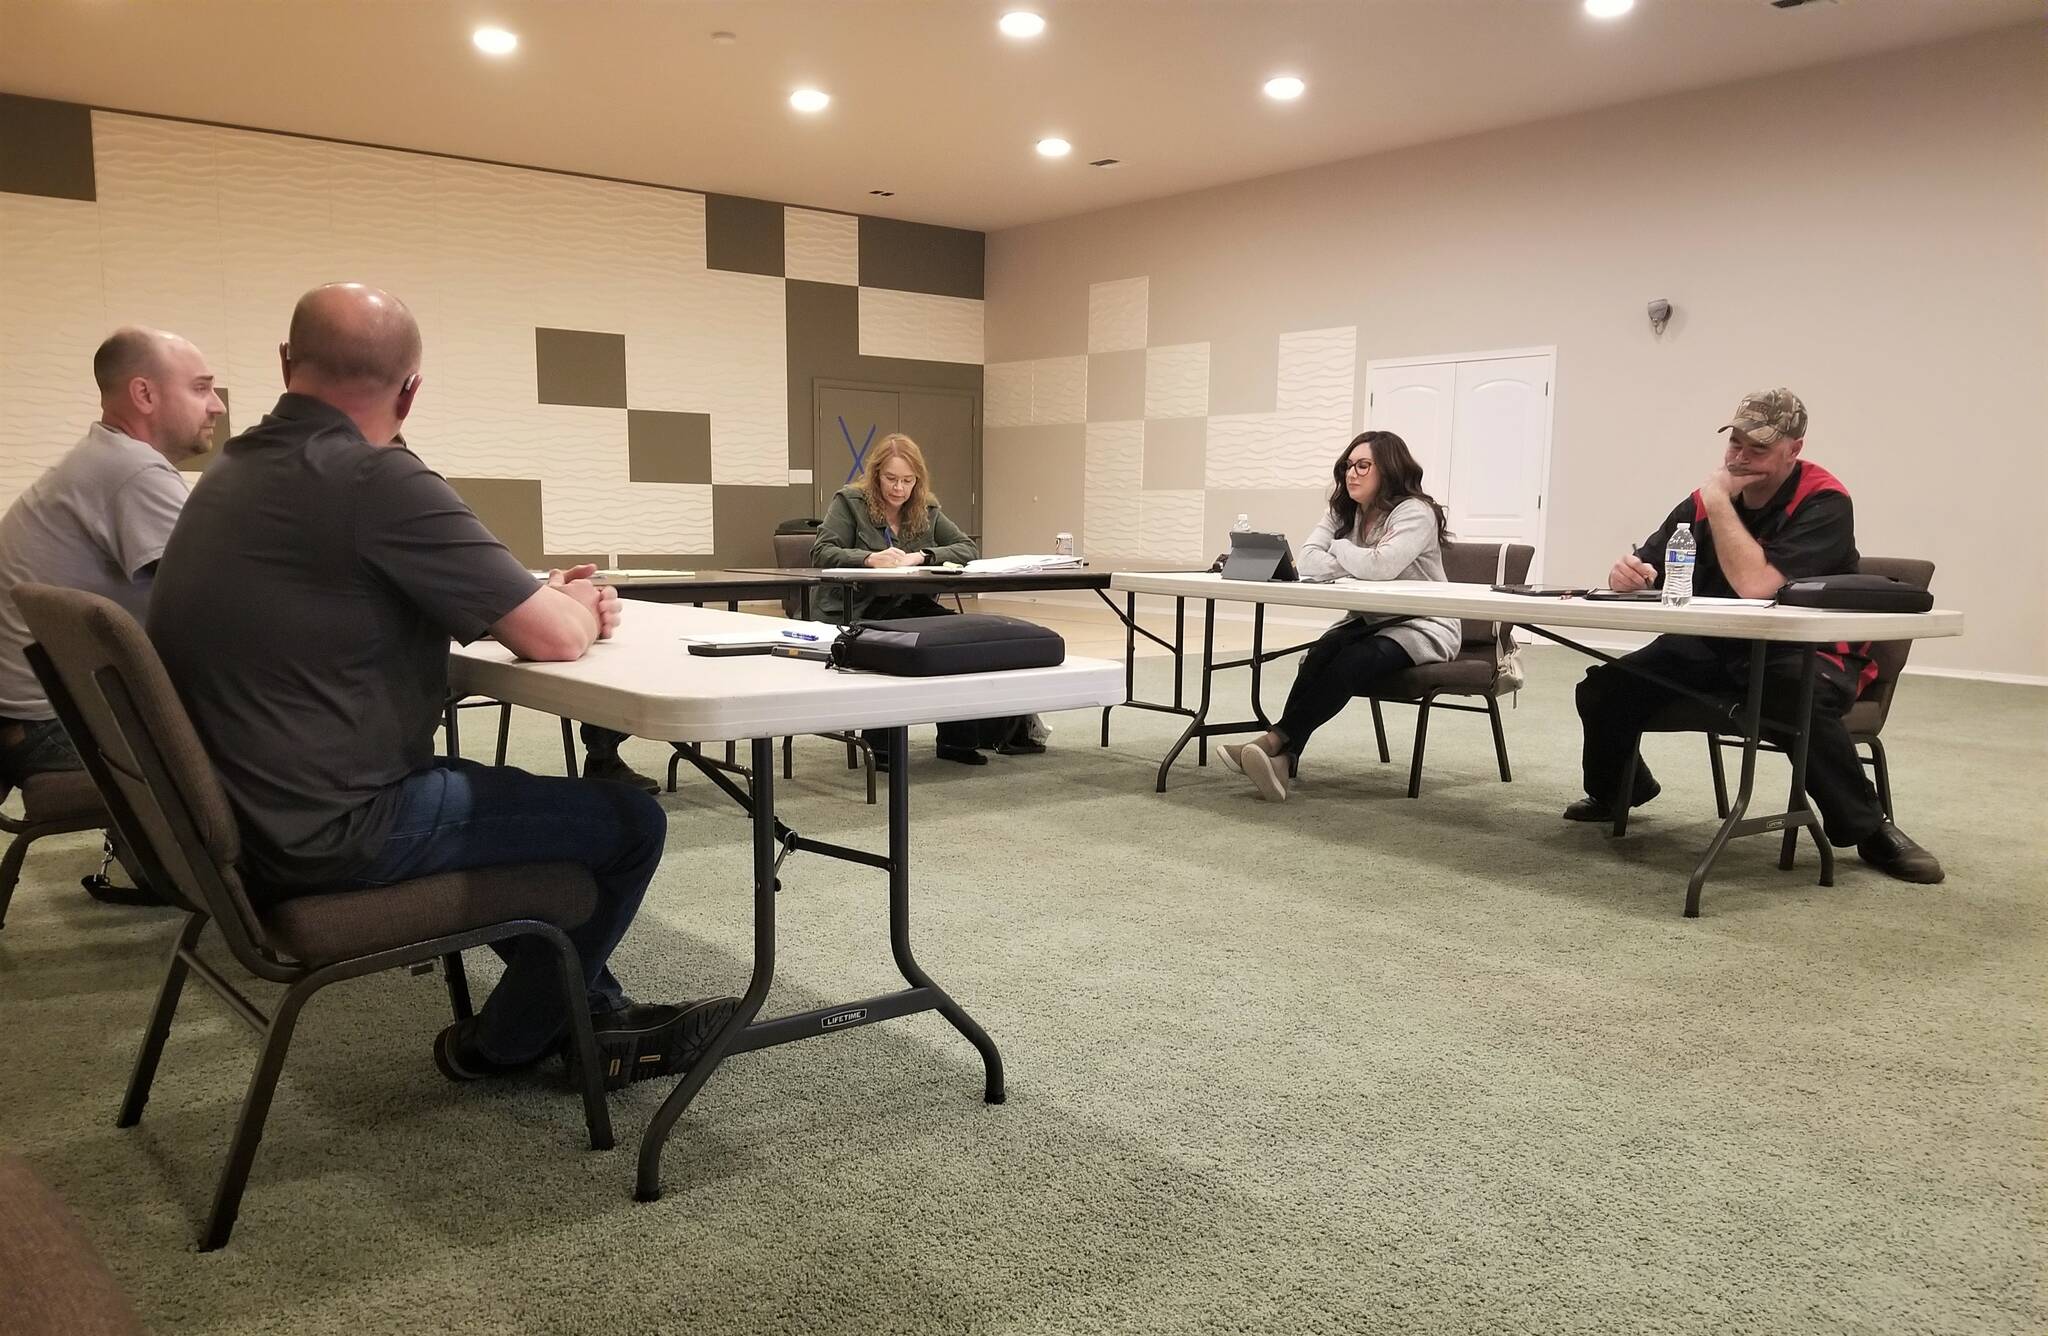 Elma City Council members (From Left to Right: Josh Collette, Pat Miller, Wendy Collins, Bethany Whipple-Boling, John Heater) conducted their first in-person meeting in more than two years at the FaithLife Church Northwest on April 25, 2022, in Elma. (Allen Leister l The Daily World)